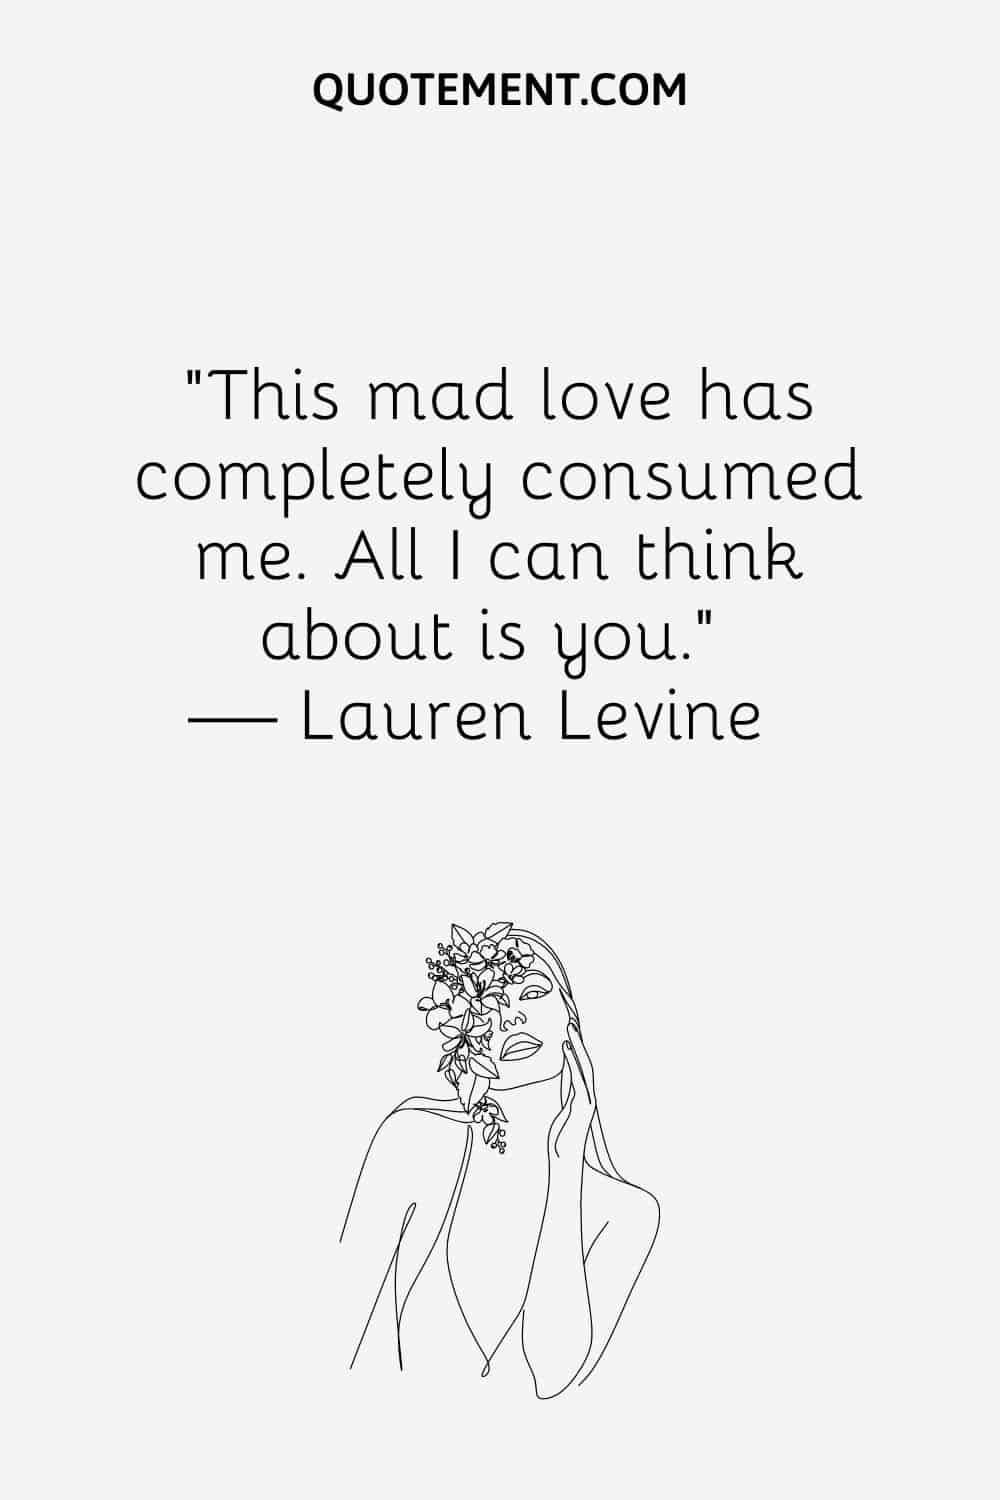 “This mad love has completely consumed me. All I can think about is you.” — Lauren Levine